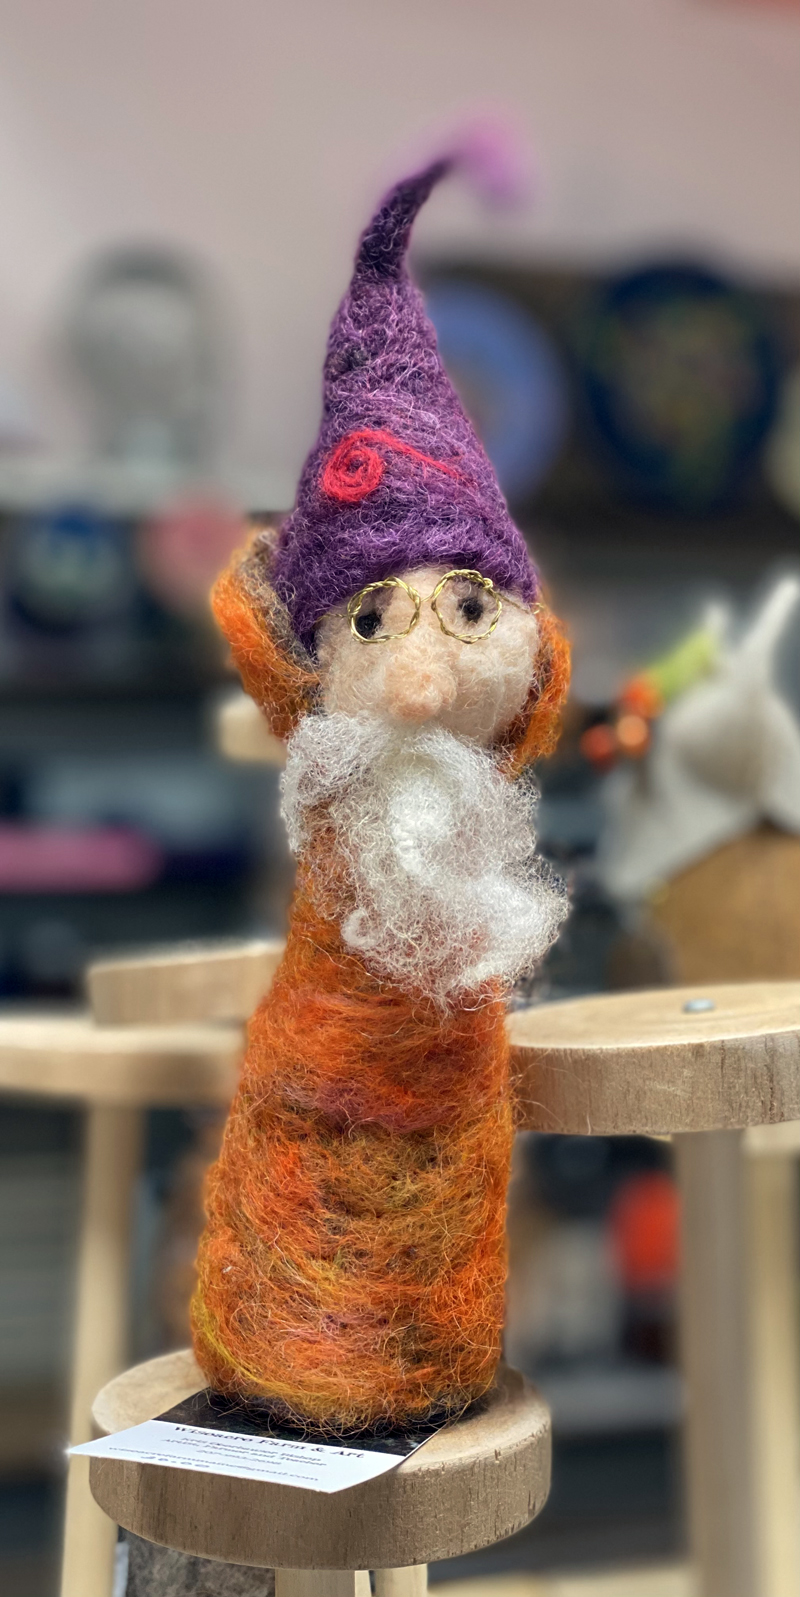 A felt wizard is one of the many handcrafted gifts one can find at the Sheepscot General Holiday Artisan Market.